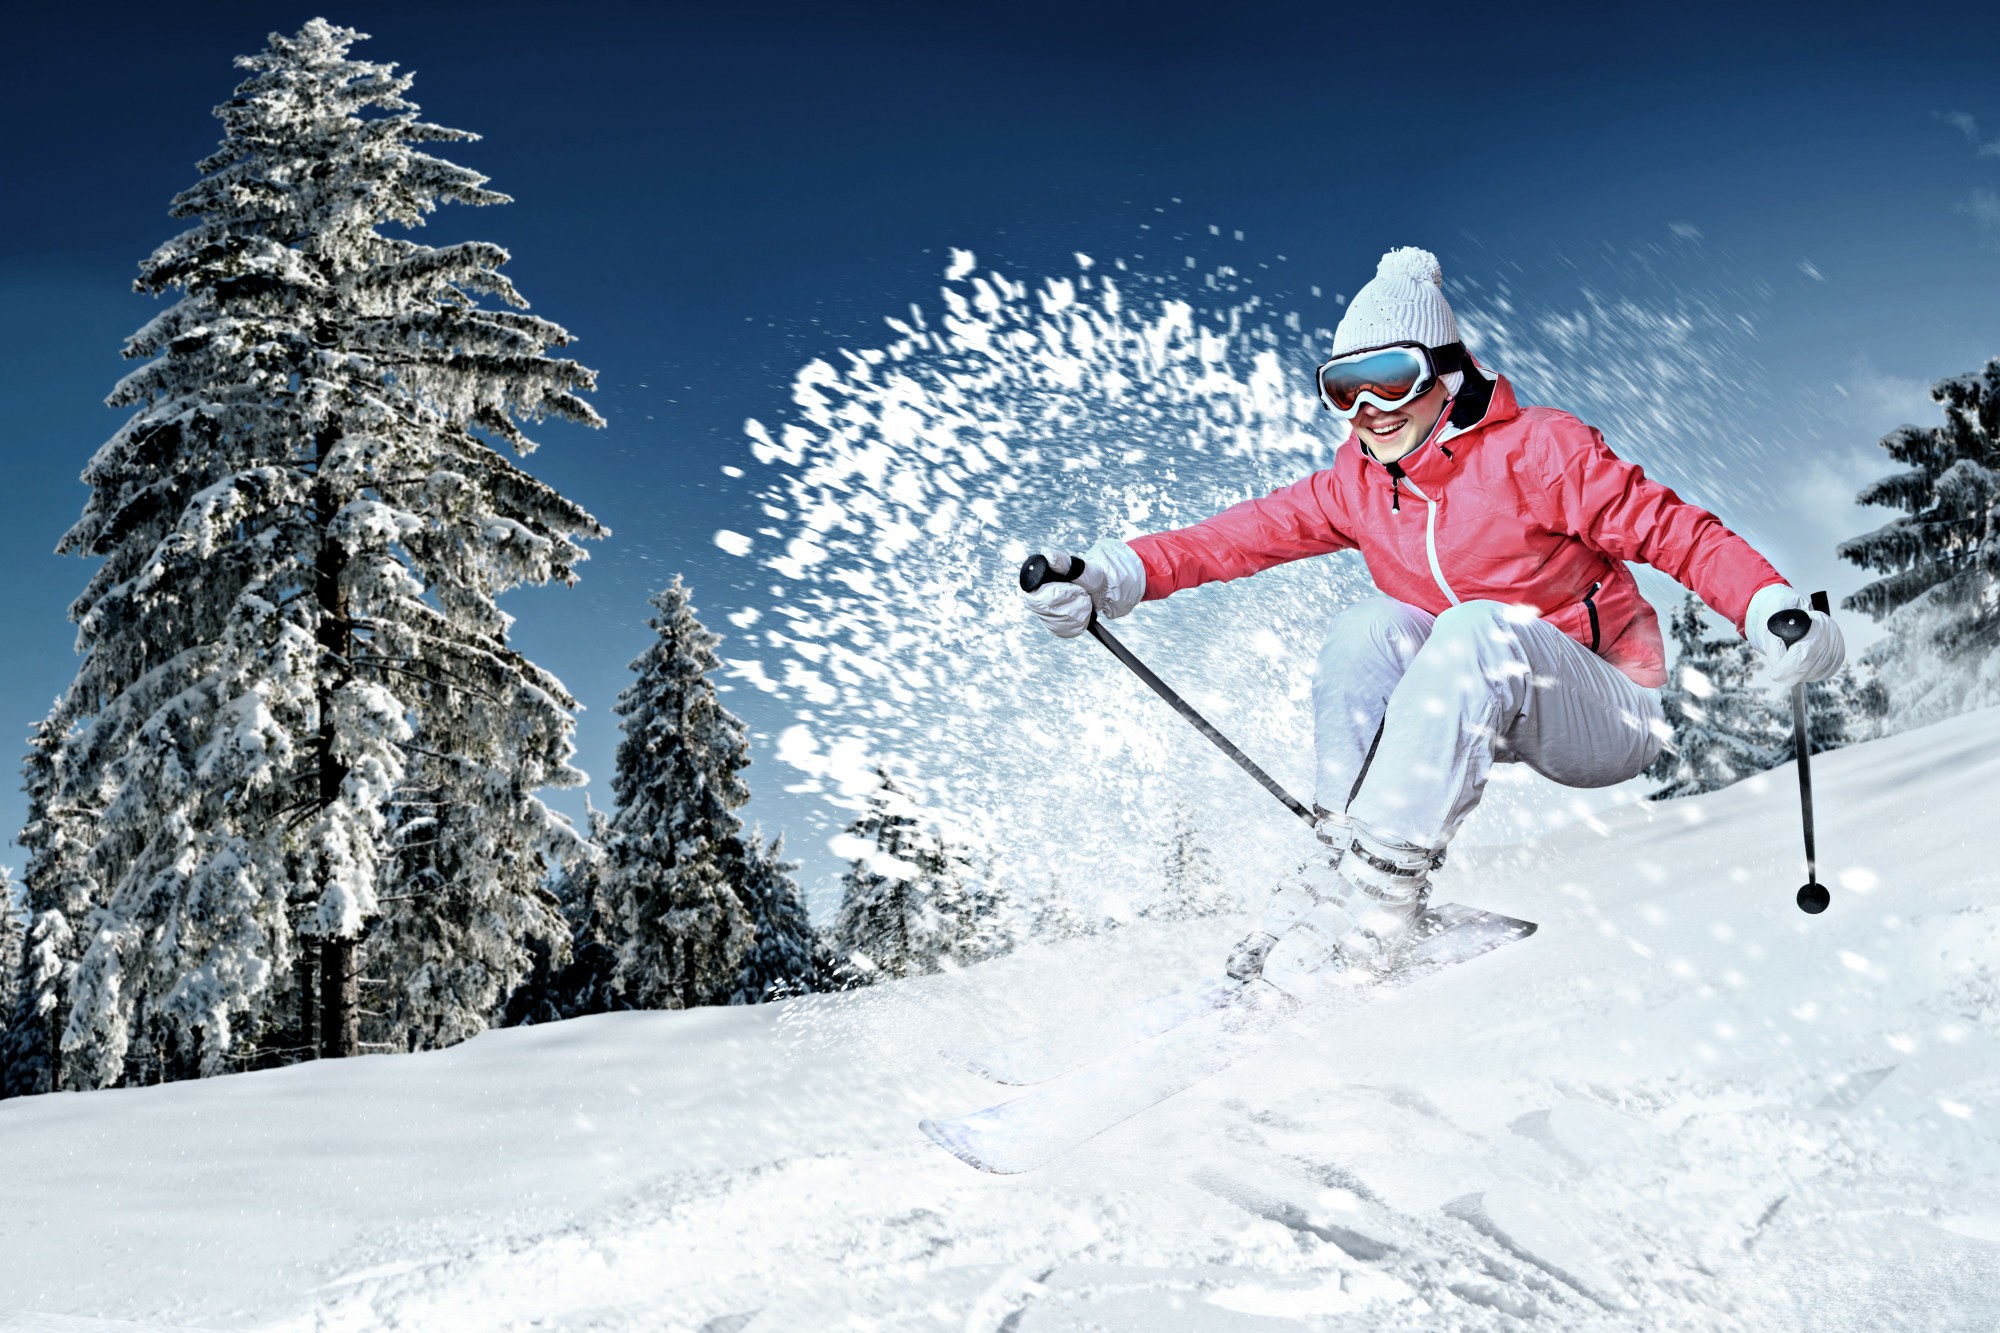 First Time Skier? Prepare for Your Trip With This List of Ski Equipment